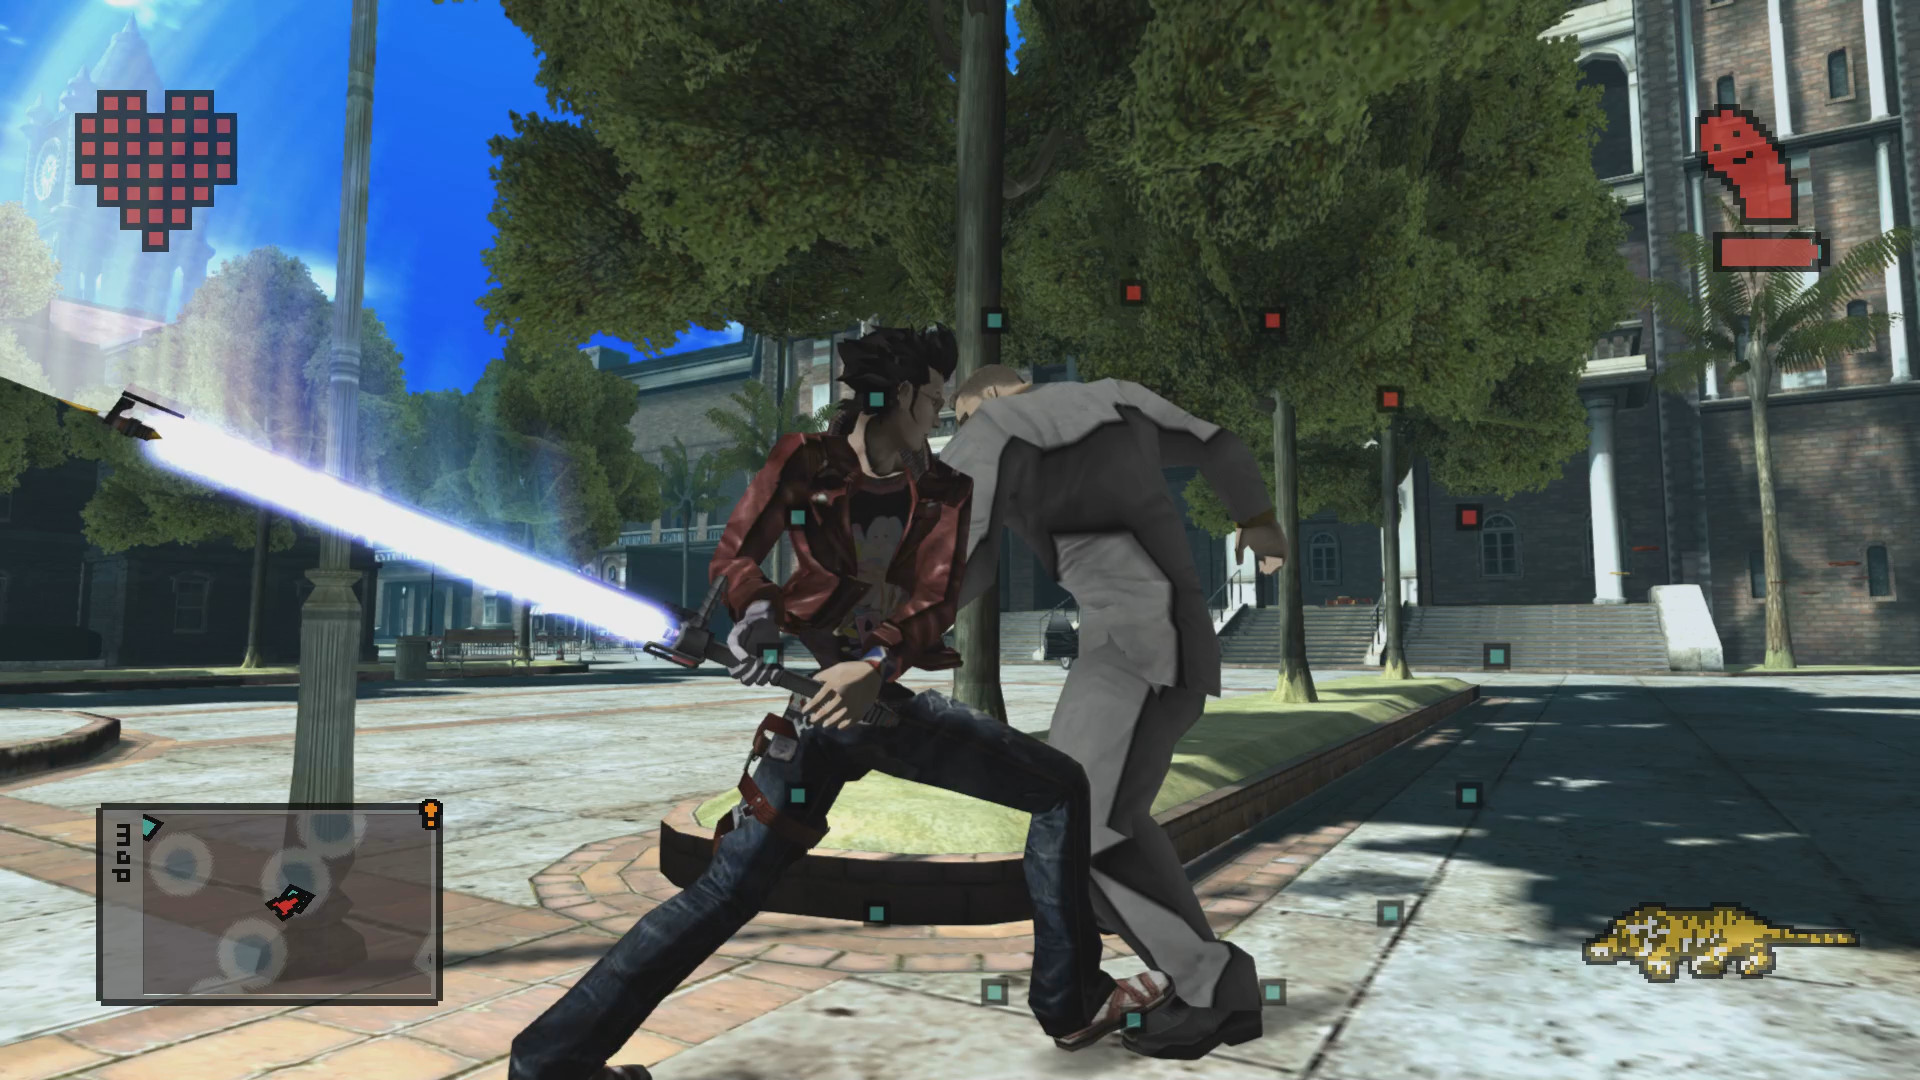 No More Heroes 1 & 2 HD remasters release on PC next week